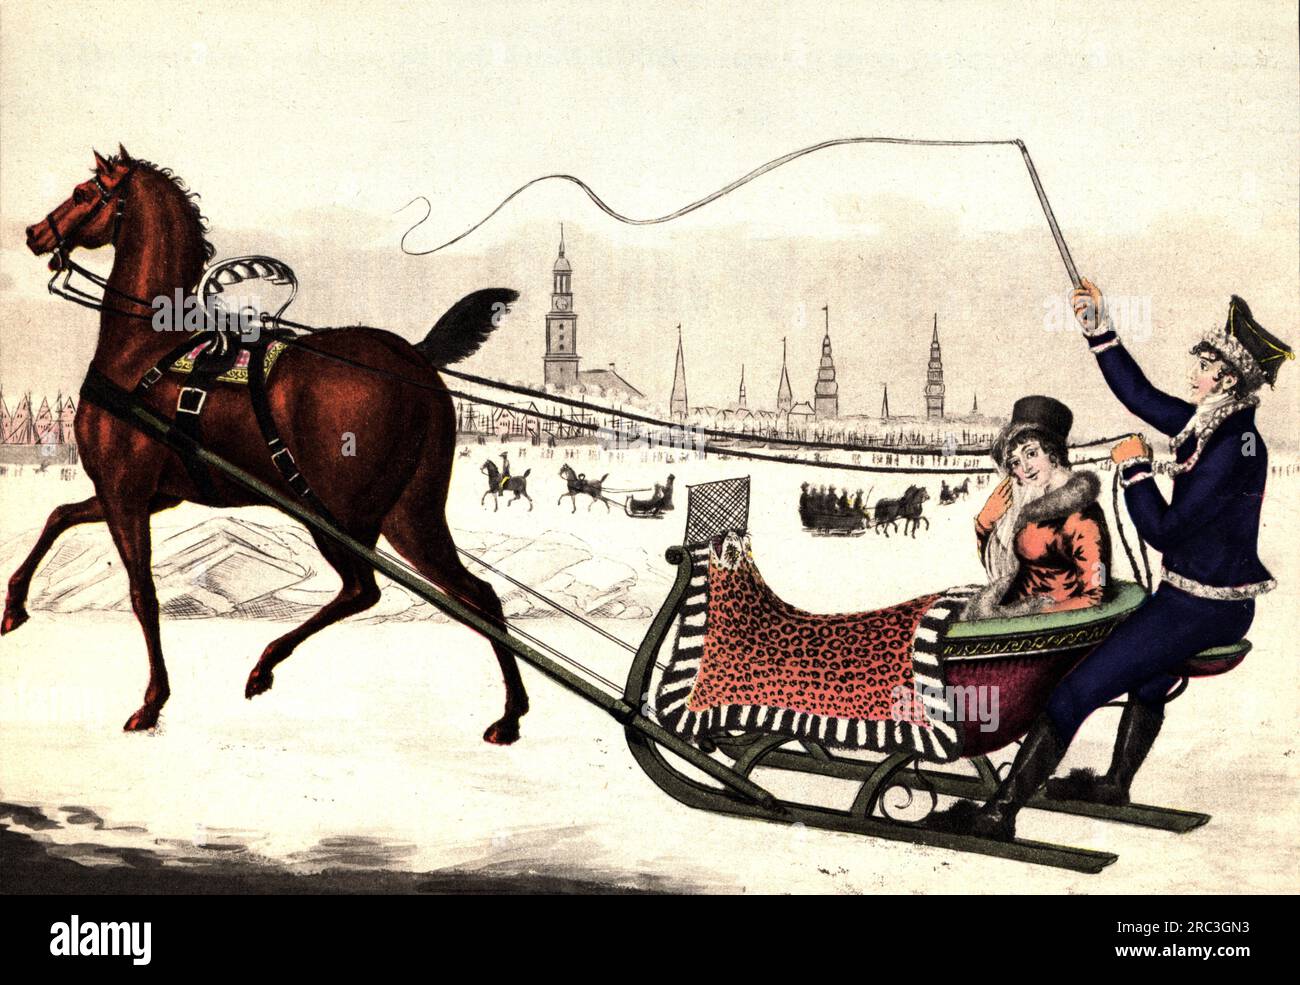 transport / transportation, sleigh, horse-drawn sleigh, sleigh ride on the Elbe river at Hamburg, ADDITIONAL-RIGHTS-CLEARANCE-INFO-NOT-AVAILABLE Stock Photo